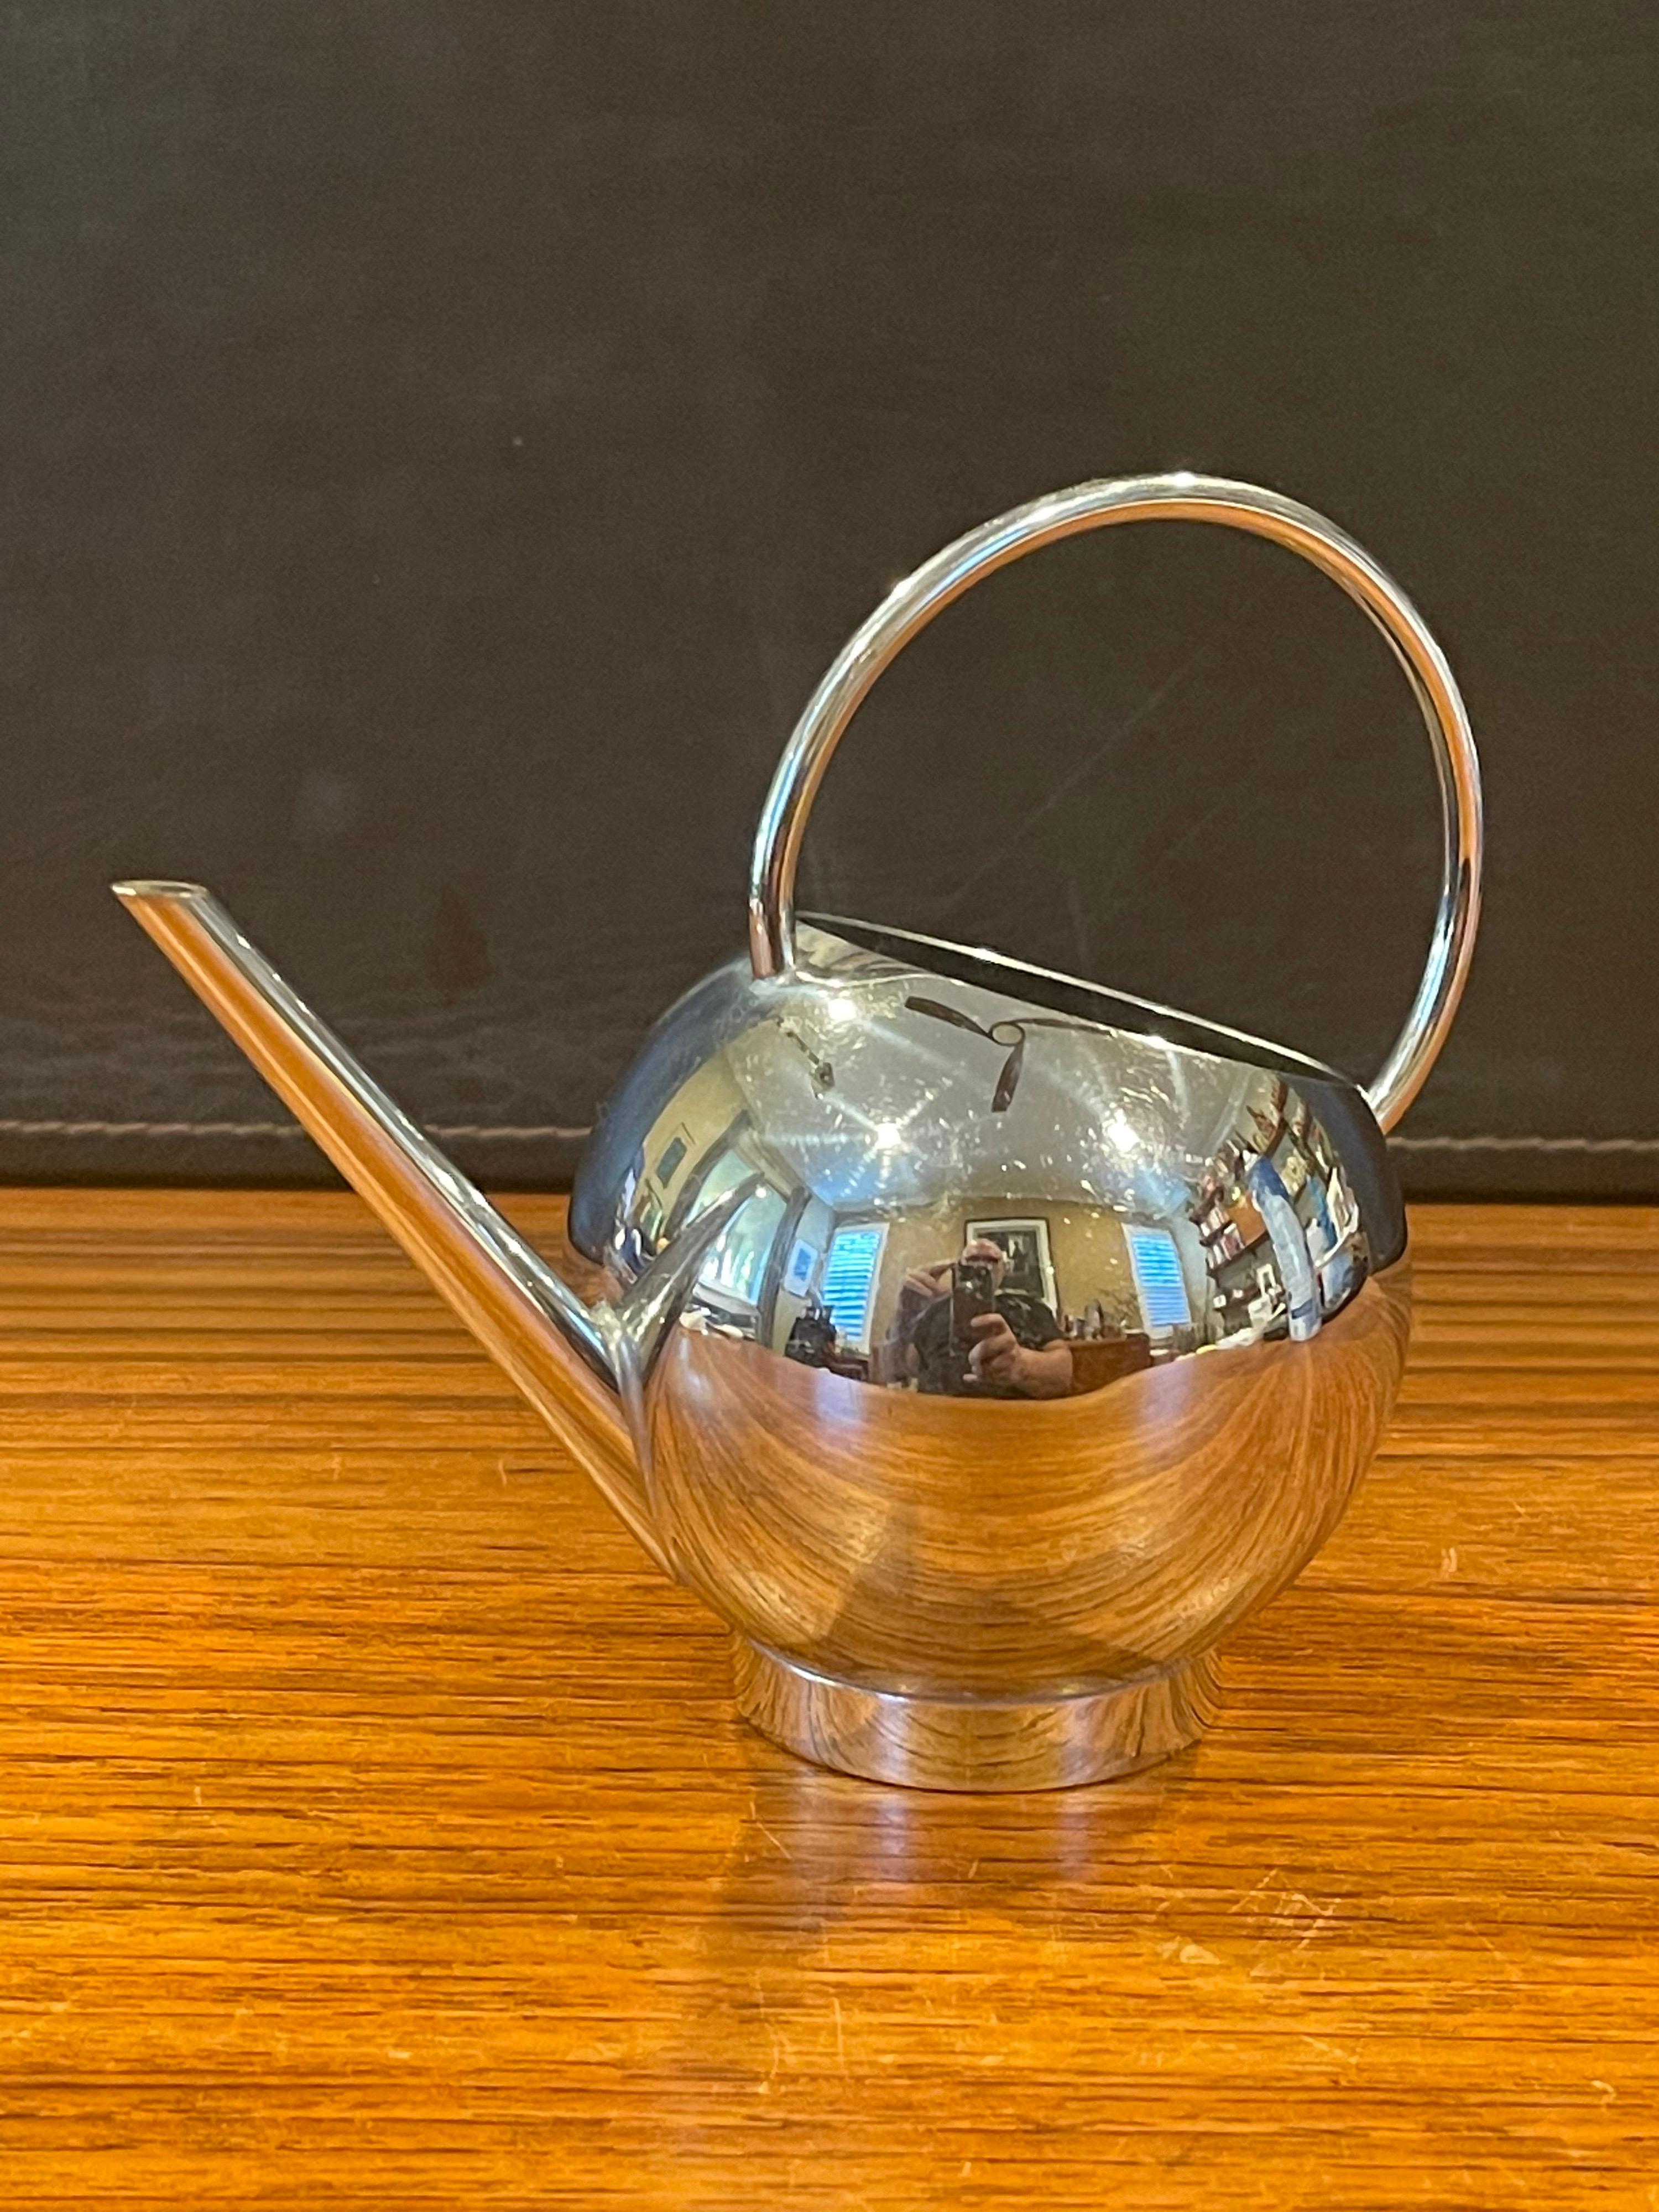 A very nice small chrome pitcher by Russel Wright for Chase & Co., circa 1940s. The modernist stainless steel design features a very sleek rounded handle and would be great for syrup, cream or watering a small plant. The piece is in very good